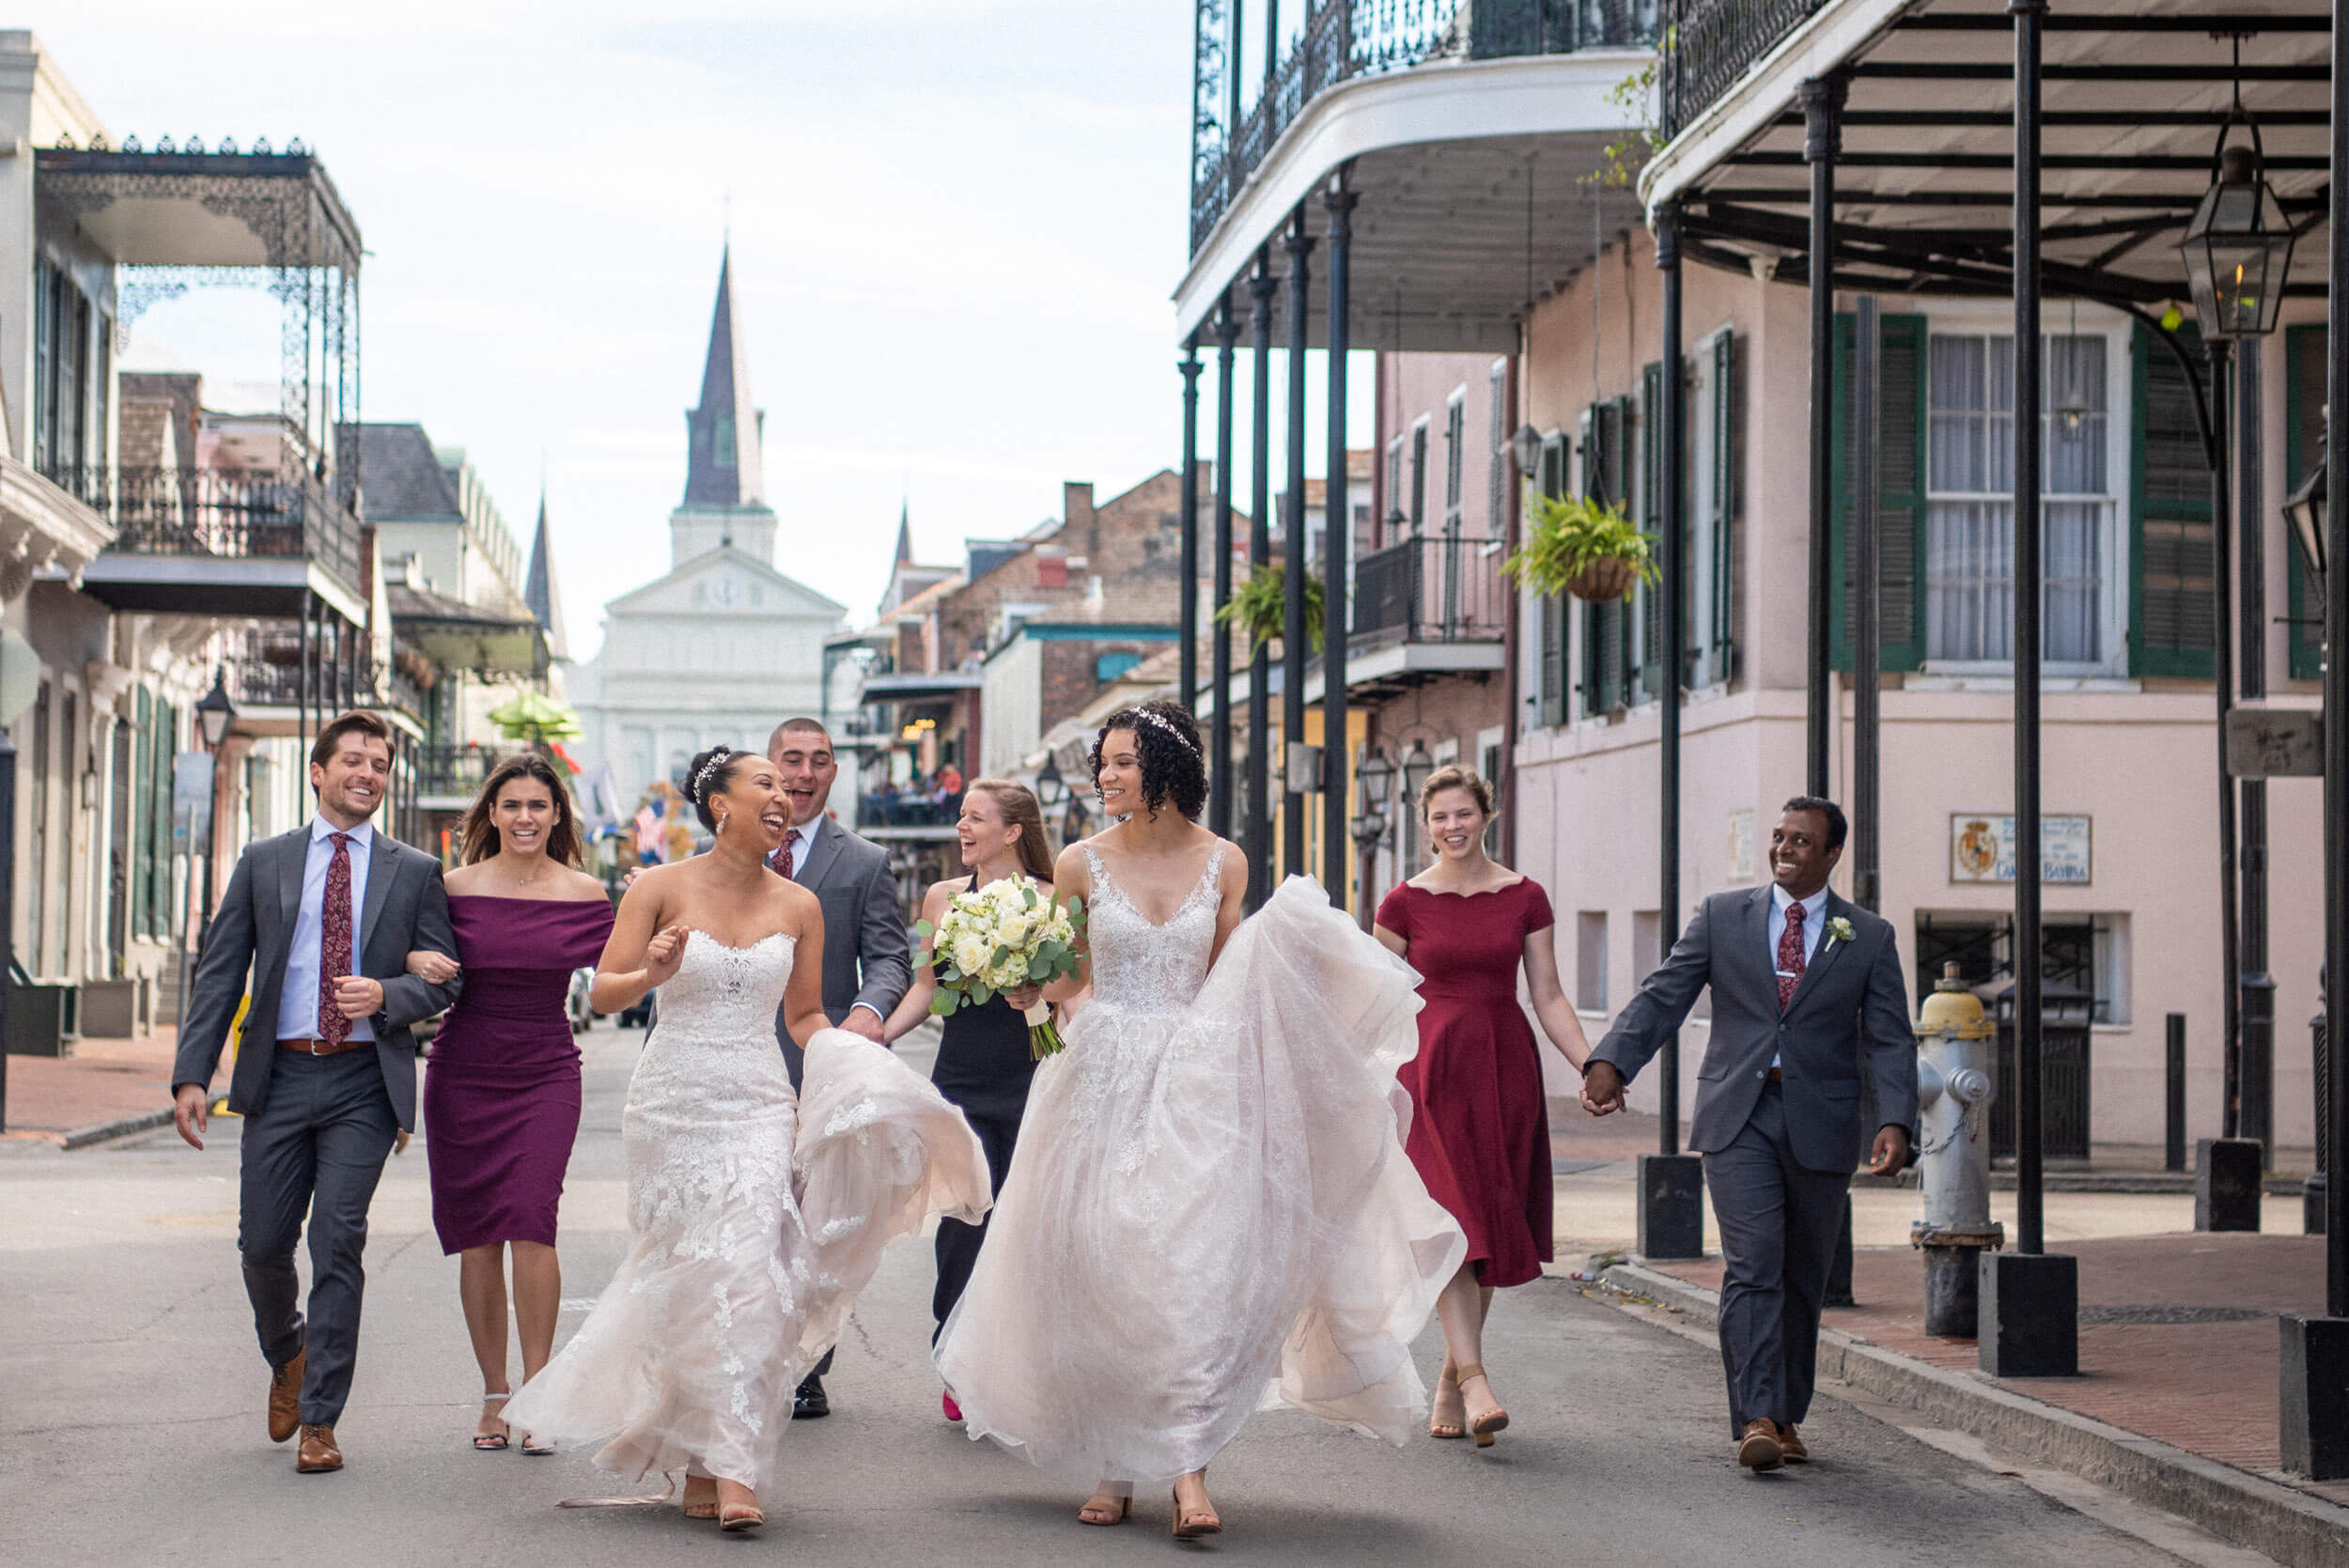 Lesbian brides and their wedding party on their way to their New Orleans French Quarter wedding.